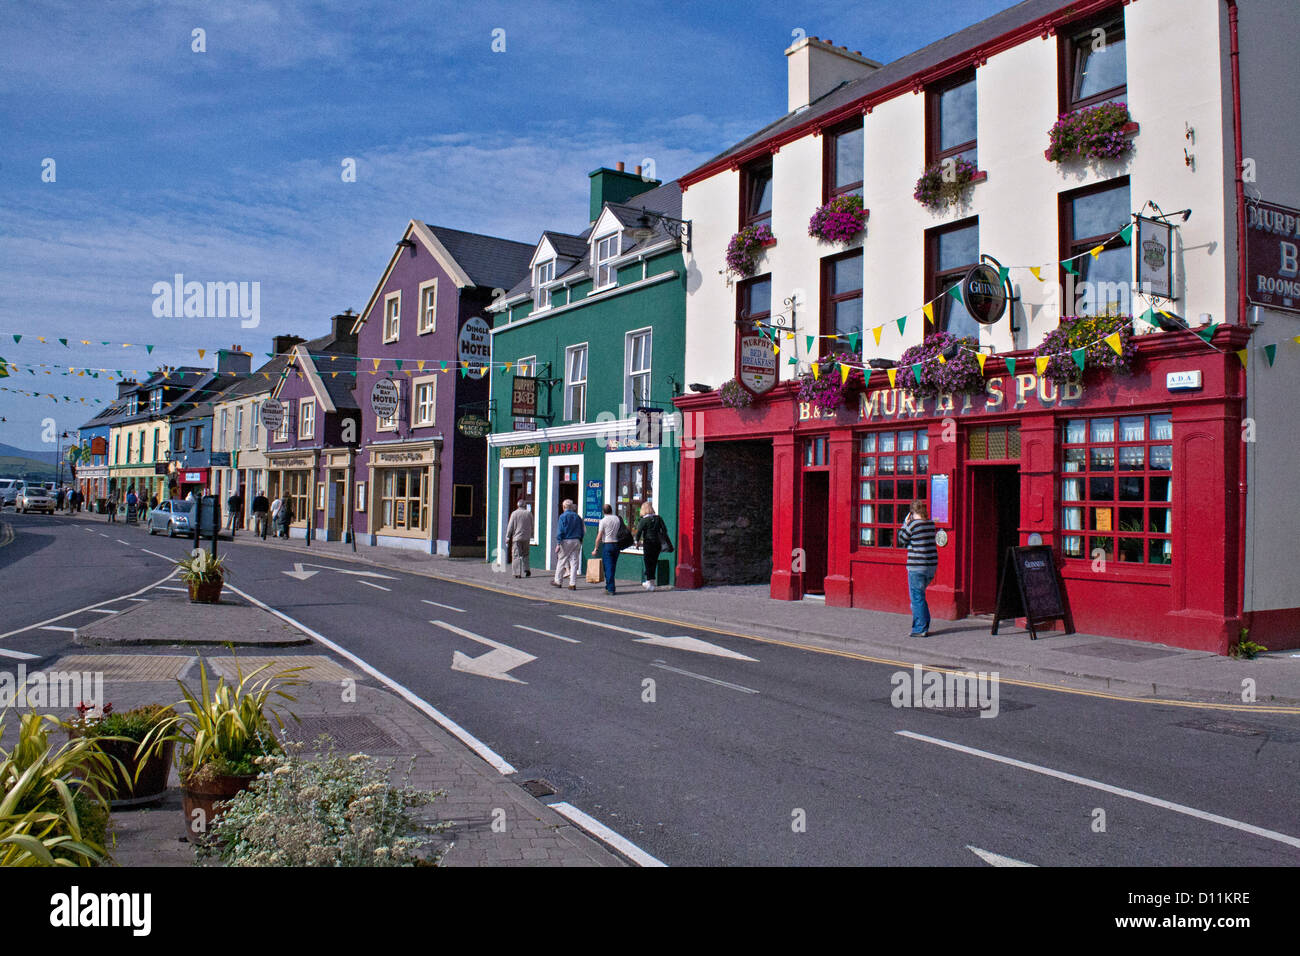 The street and stores of Dingle, Dingle County, a small quaint fishing village in the Republic of Ireland. Stock Photo